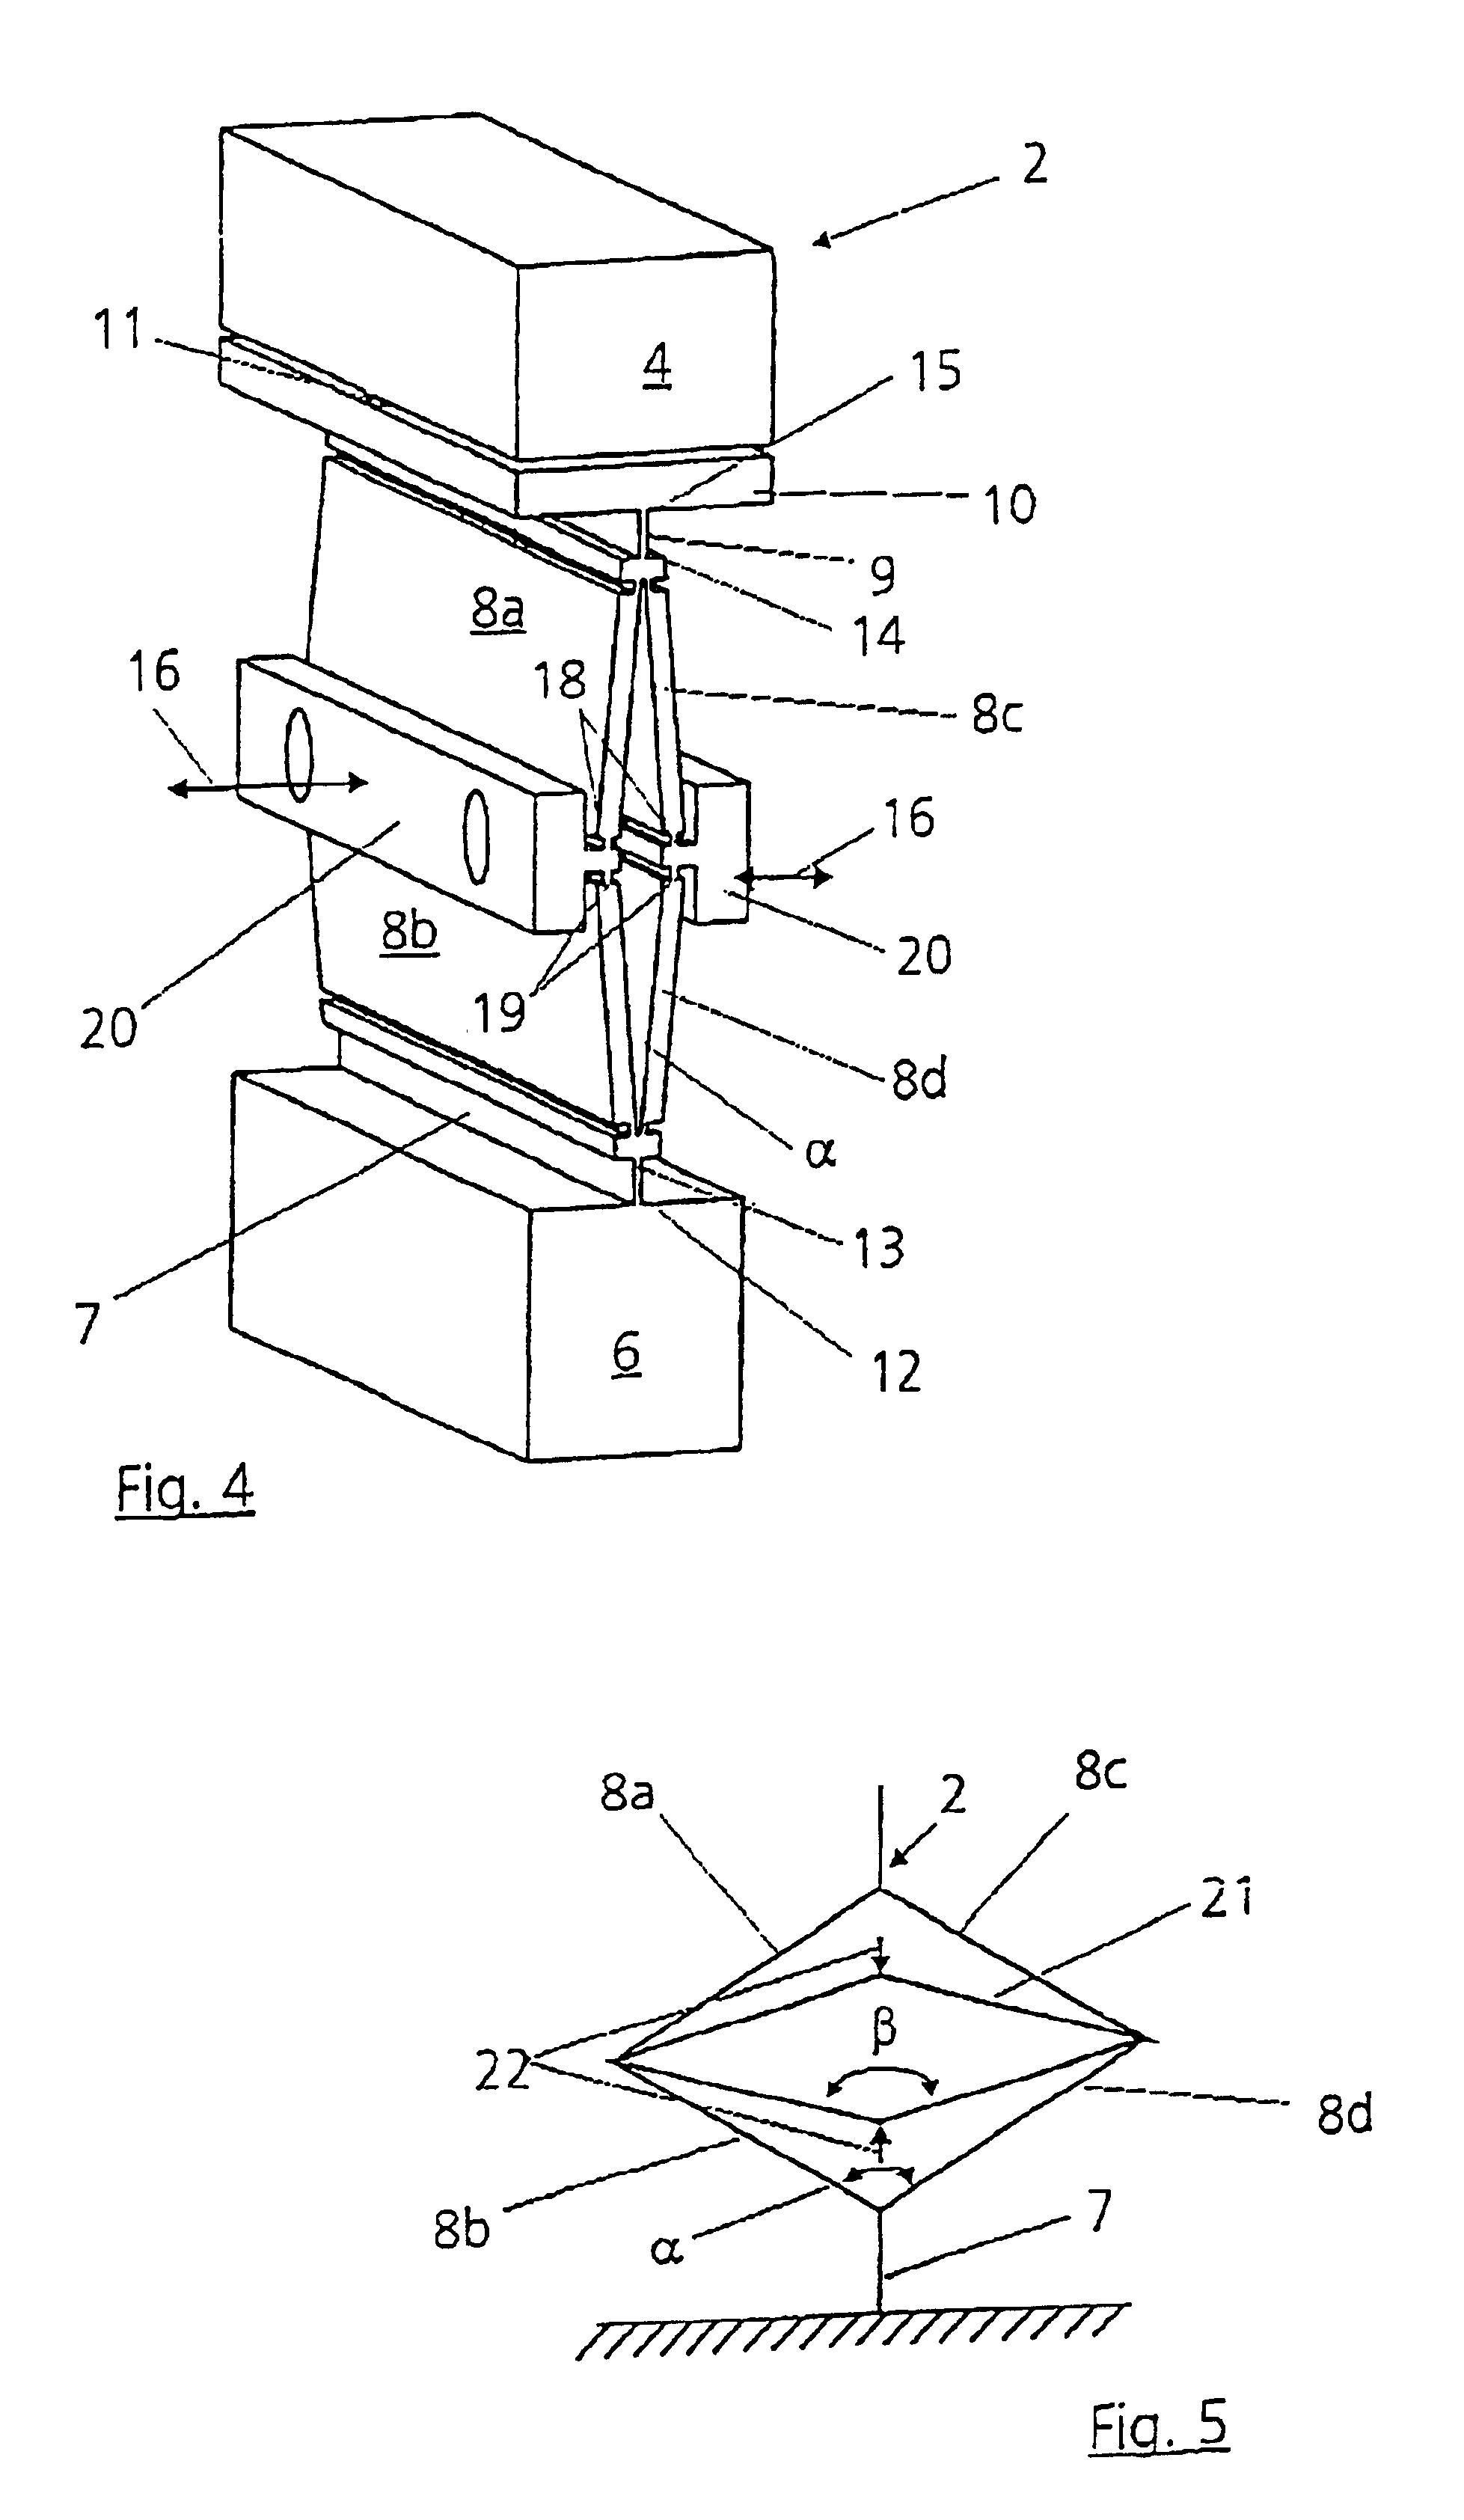 Apparatus for mounting an optical element in an optical system